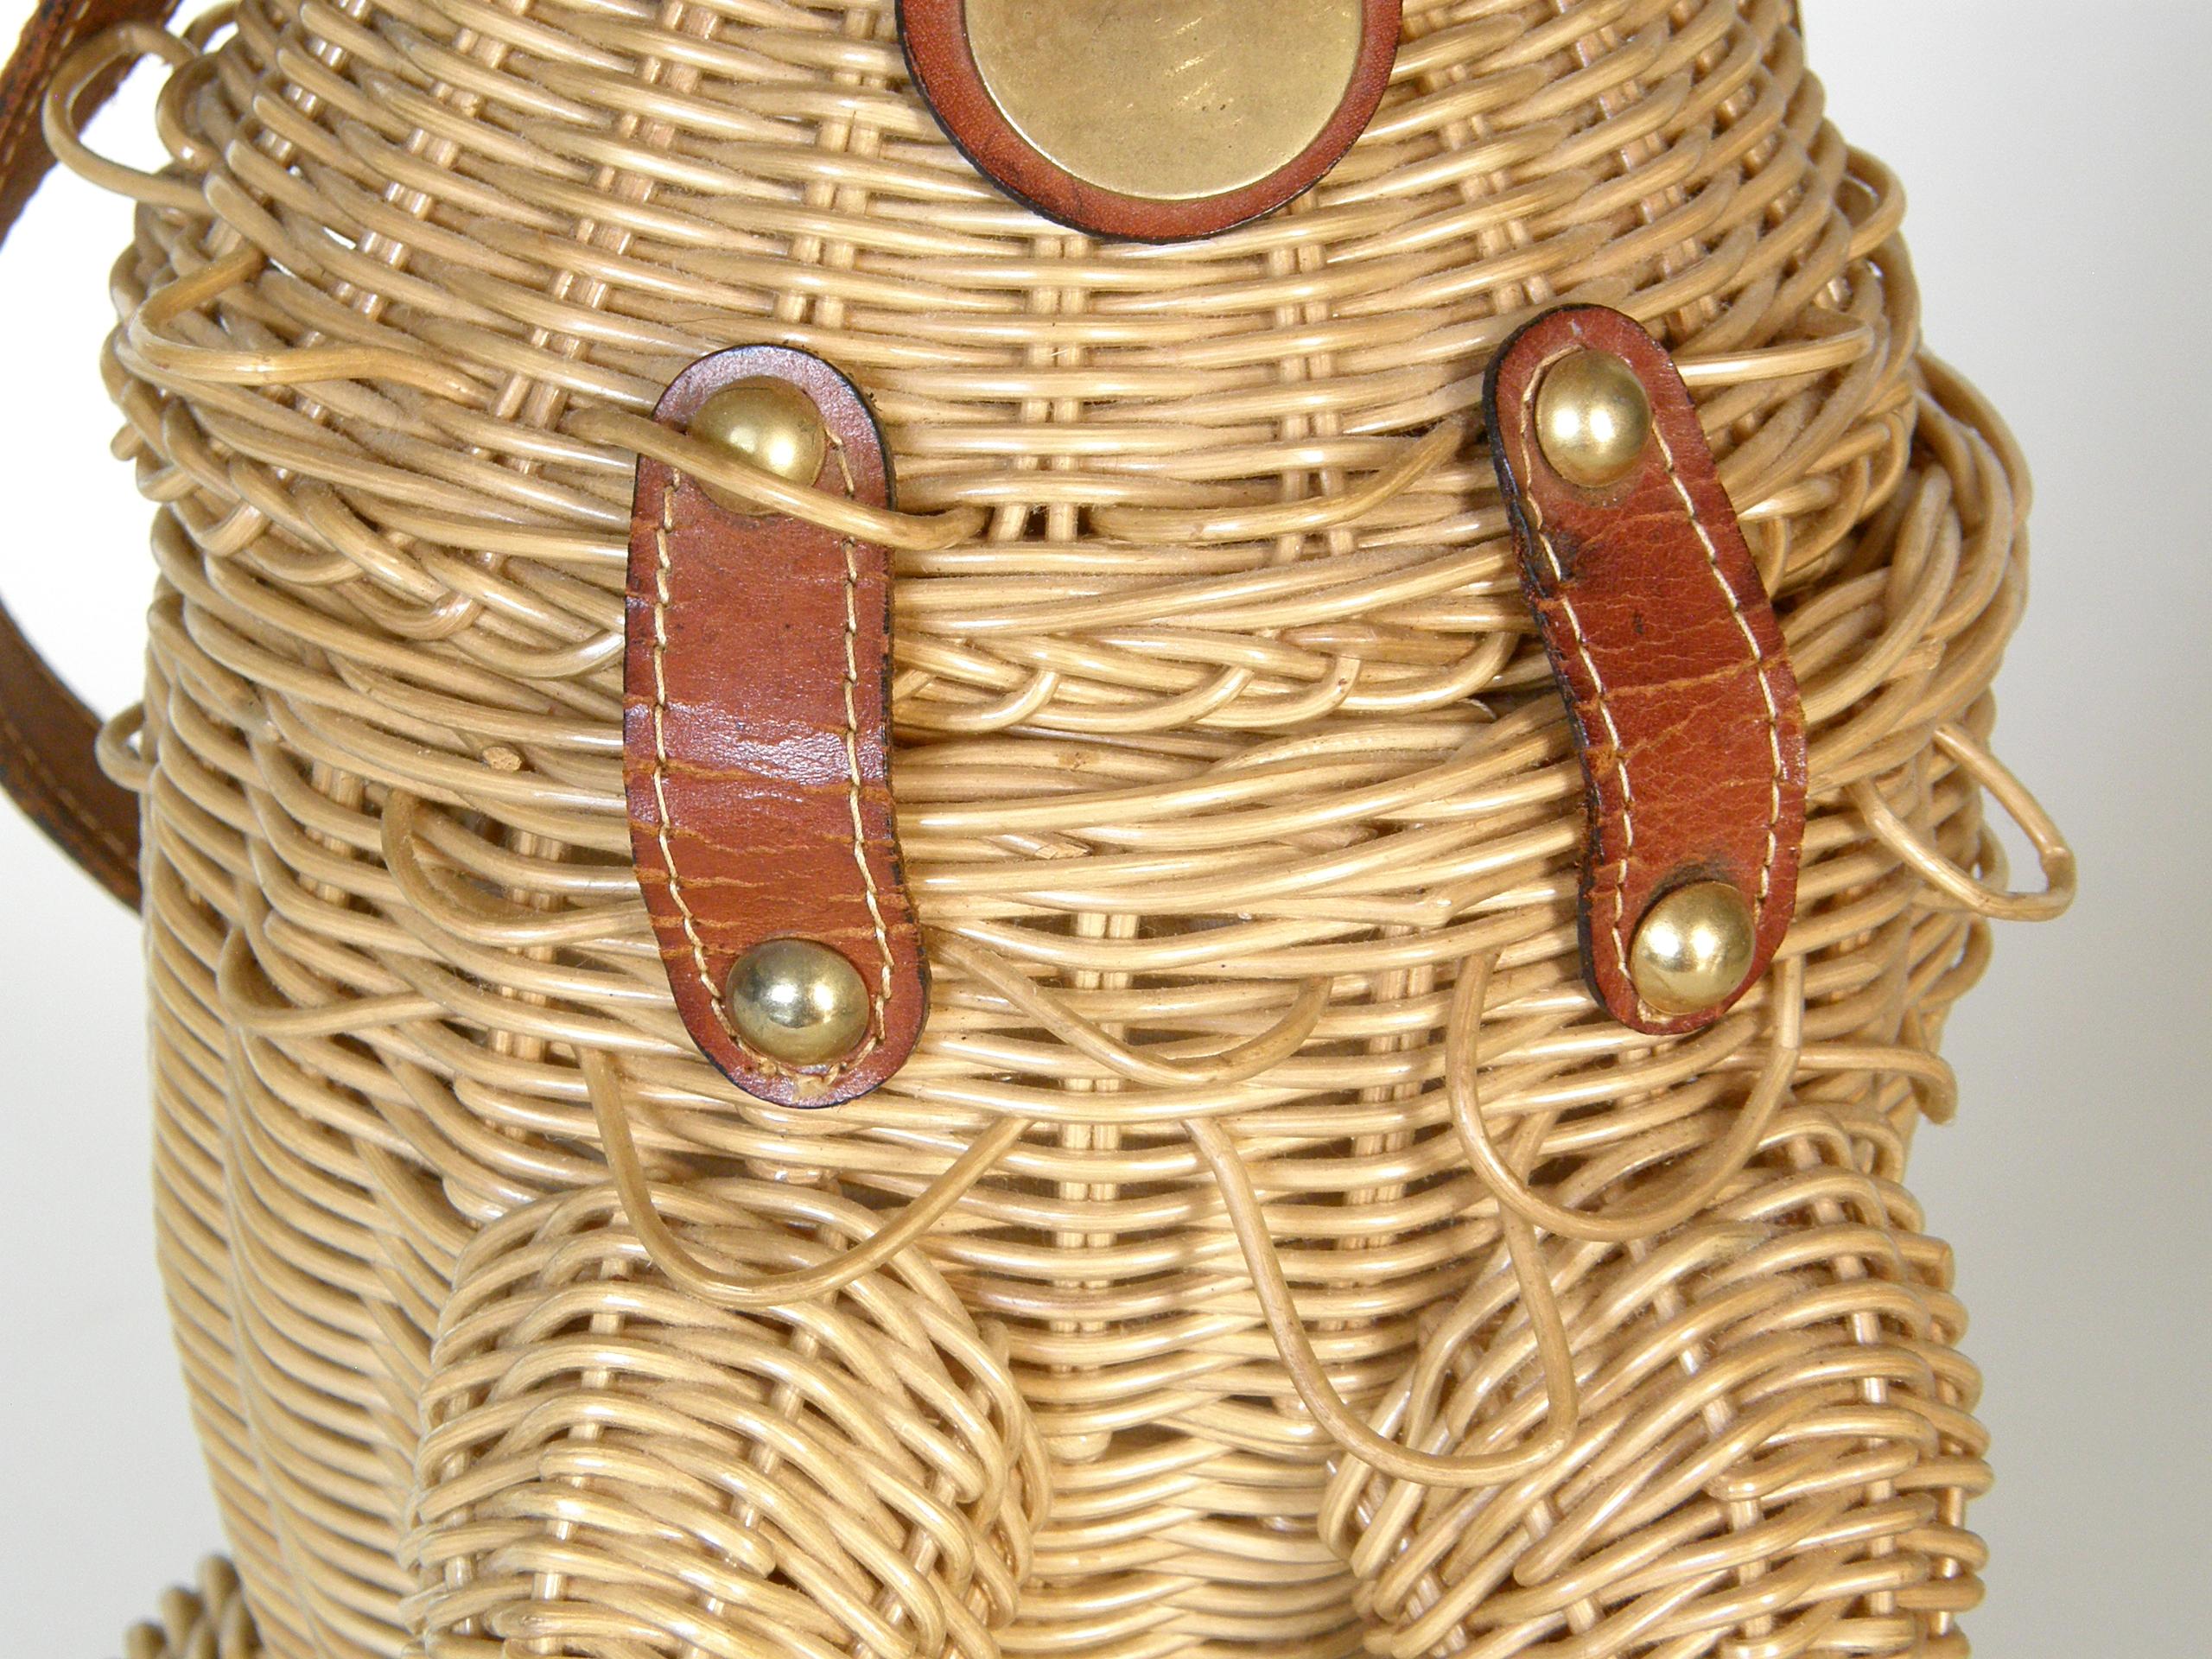 Women's or Men's Wicker Dog Handbag by Marcus Brothers with Leather Harness and Studded Collar